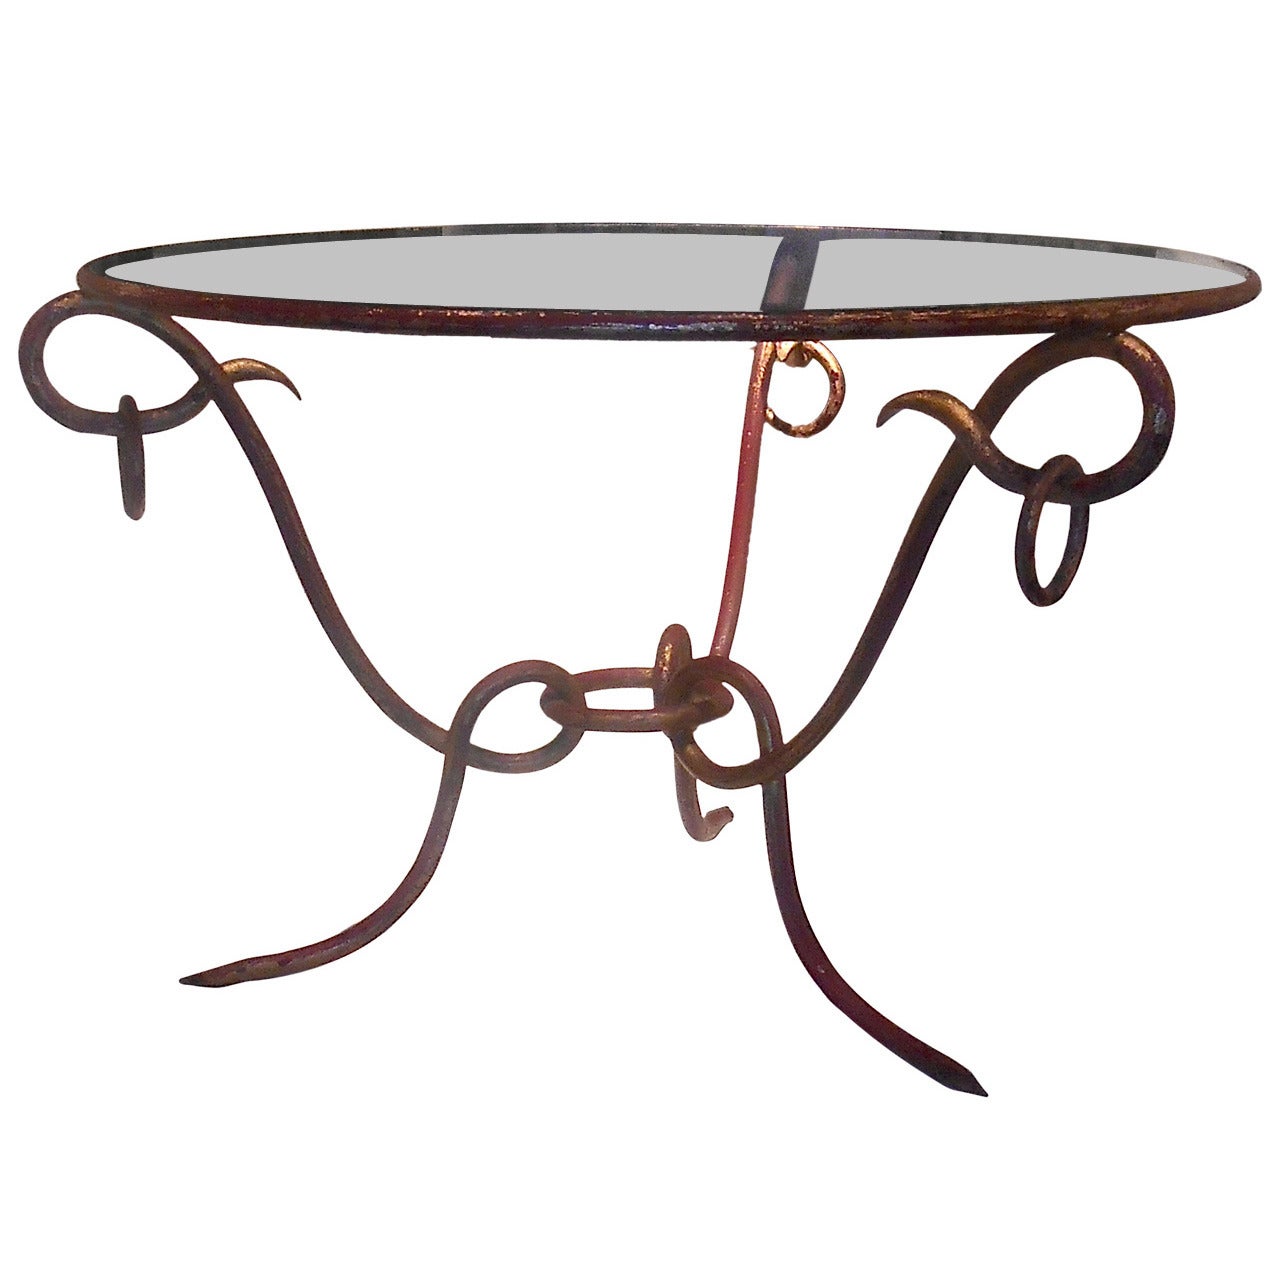 Neo Antique Gilded Wrought Iron Table by R. Drouet